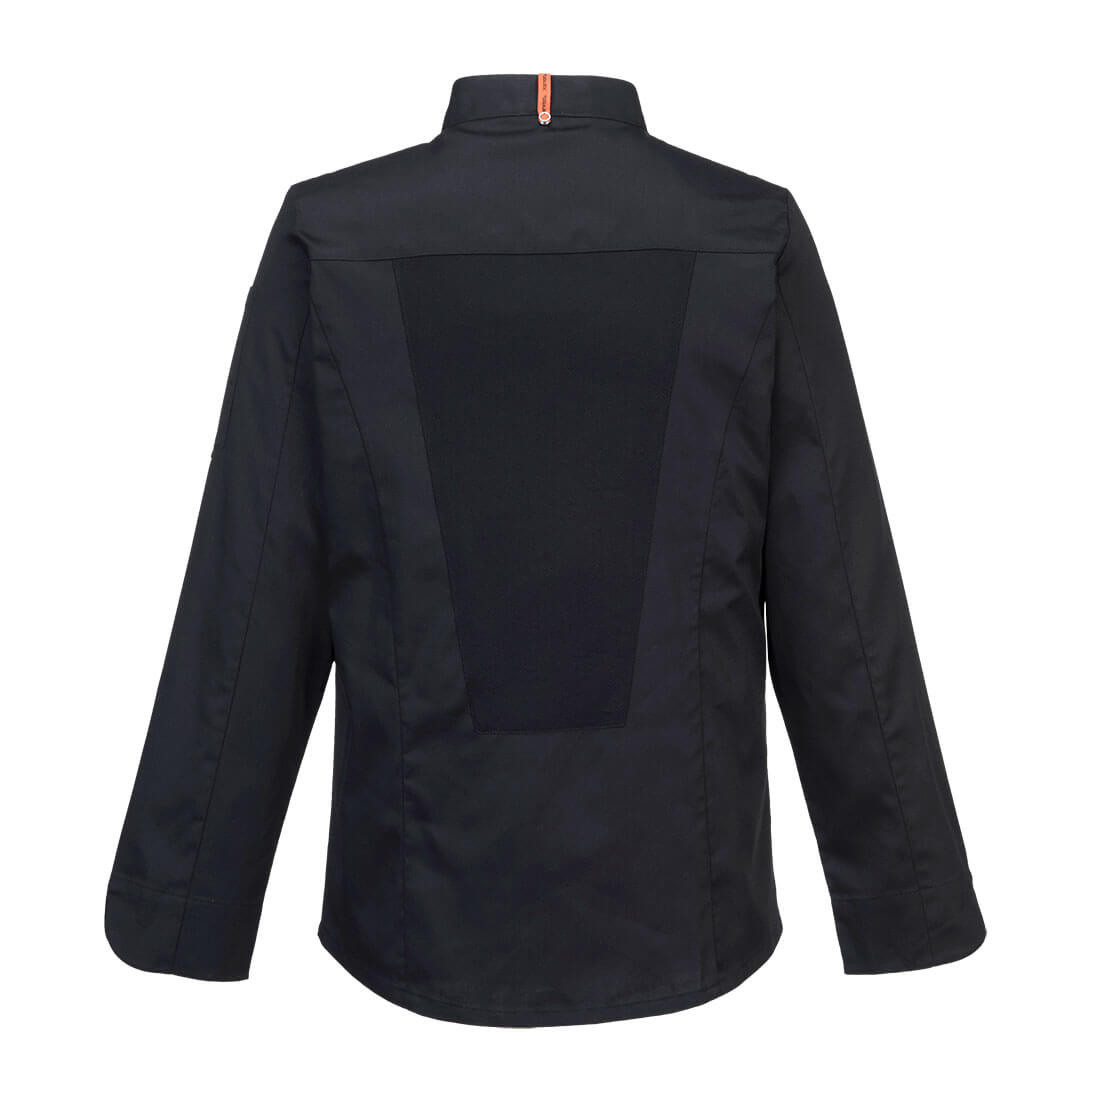 Stretch Mesh Air Pro Long Sleeve Jacket - Safetywear